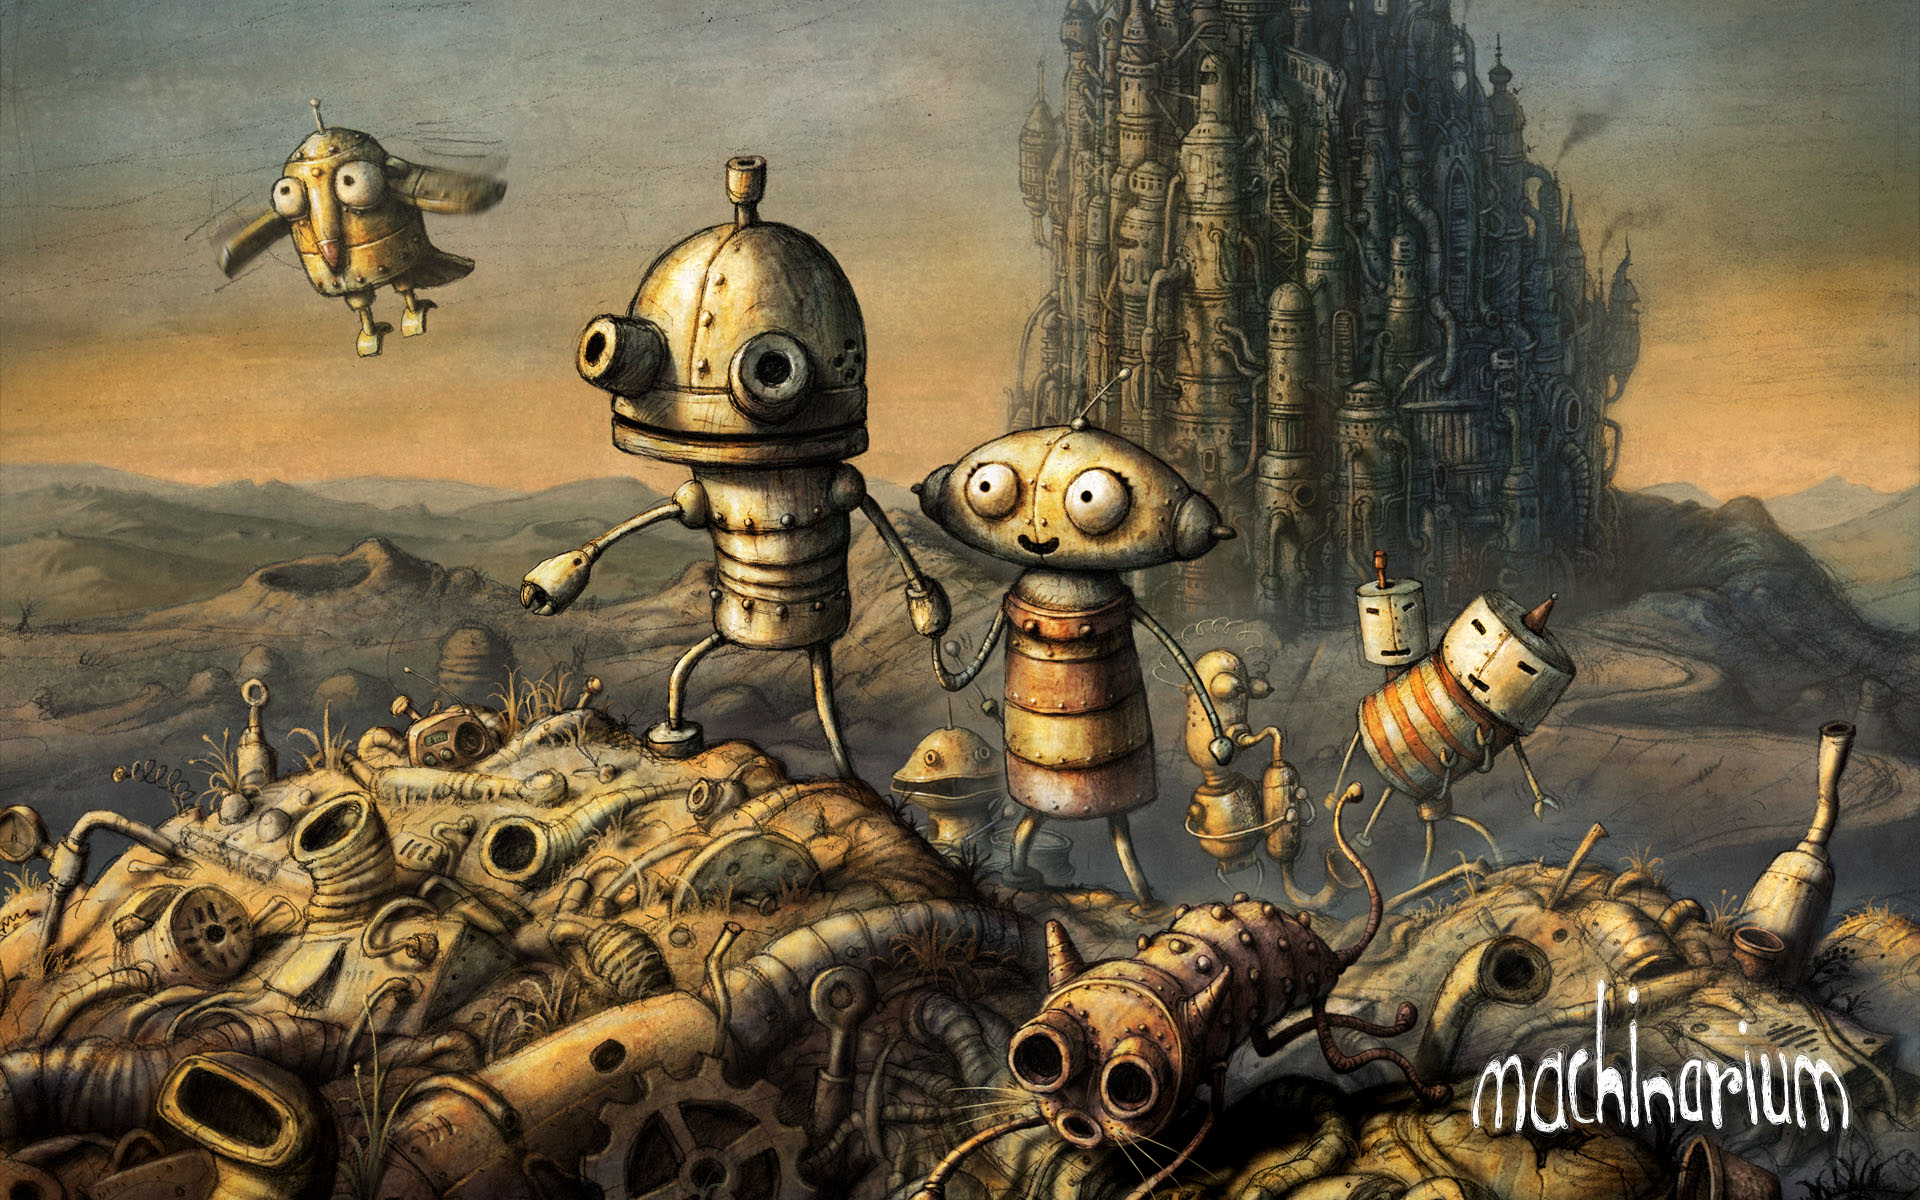 Machinarium Now Available for iPad